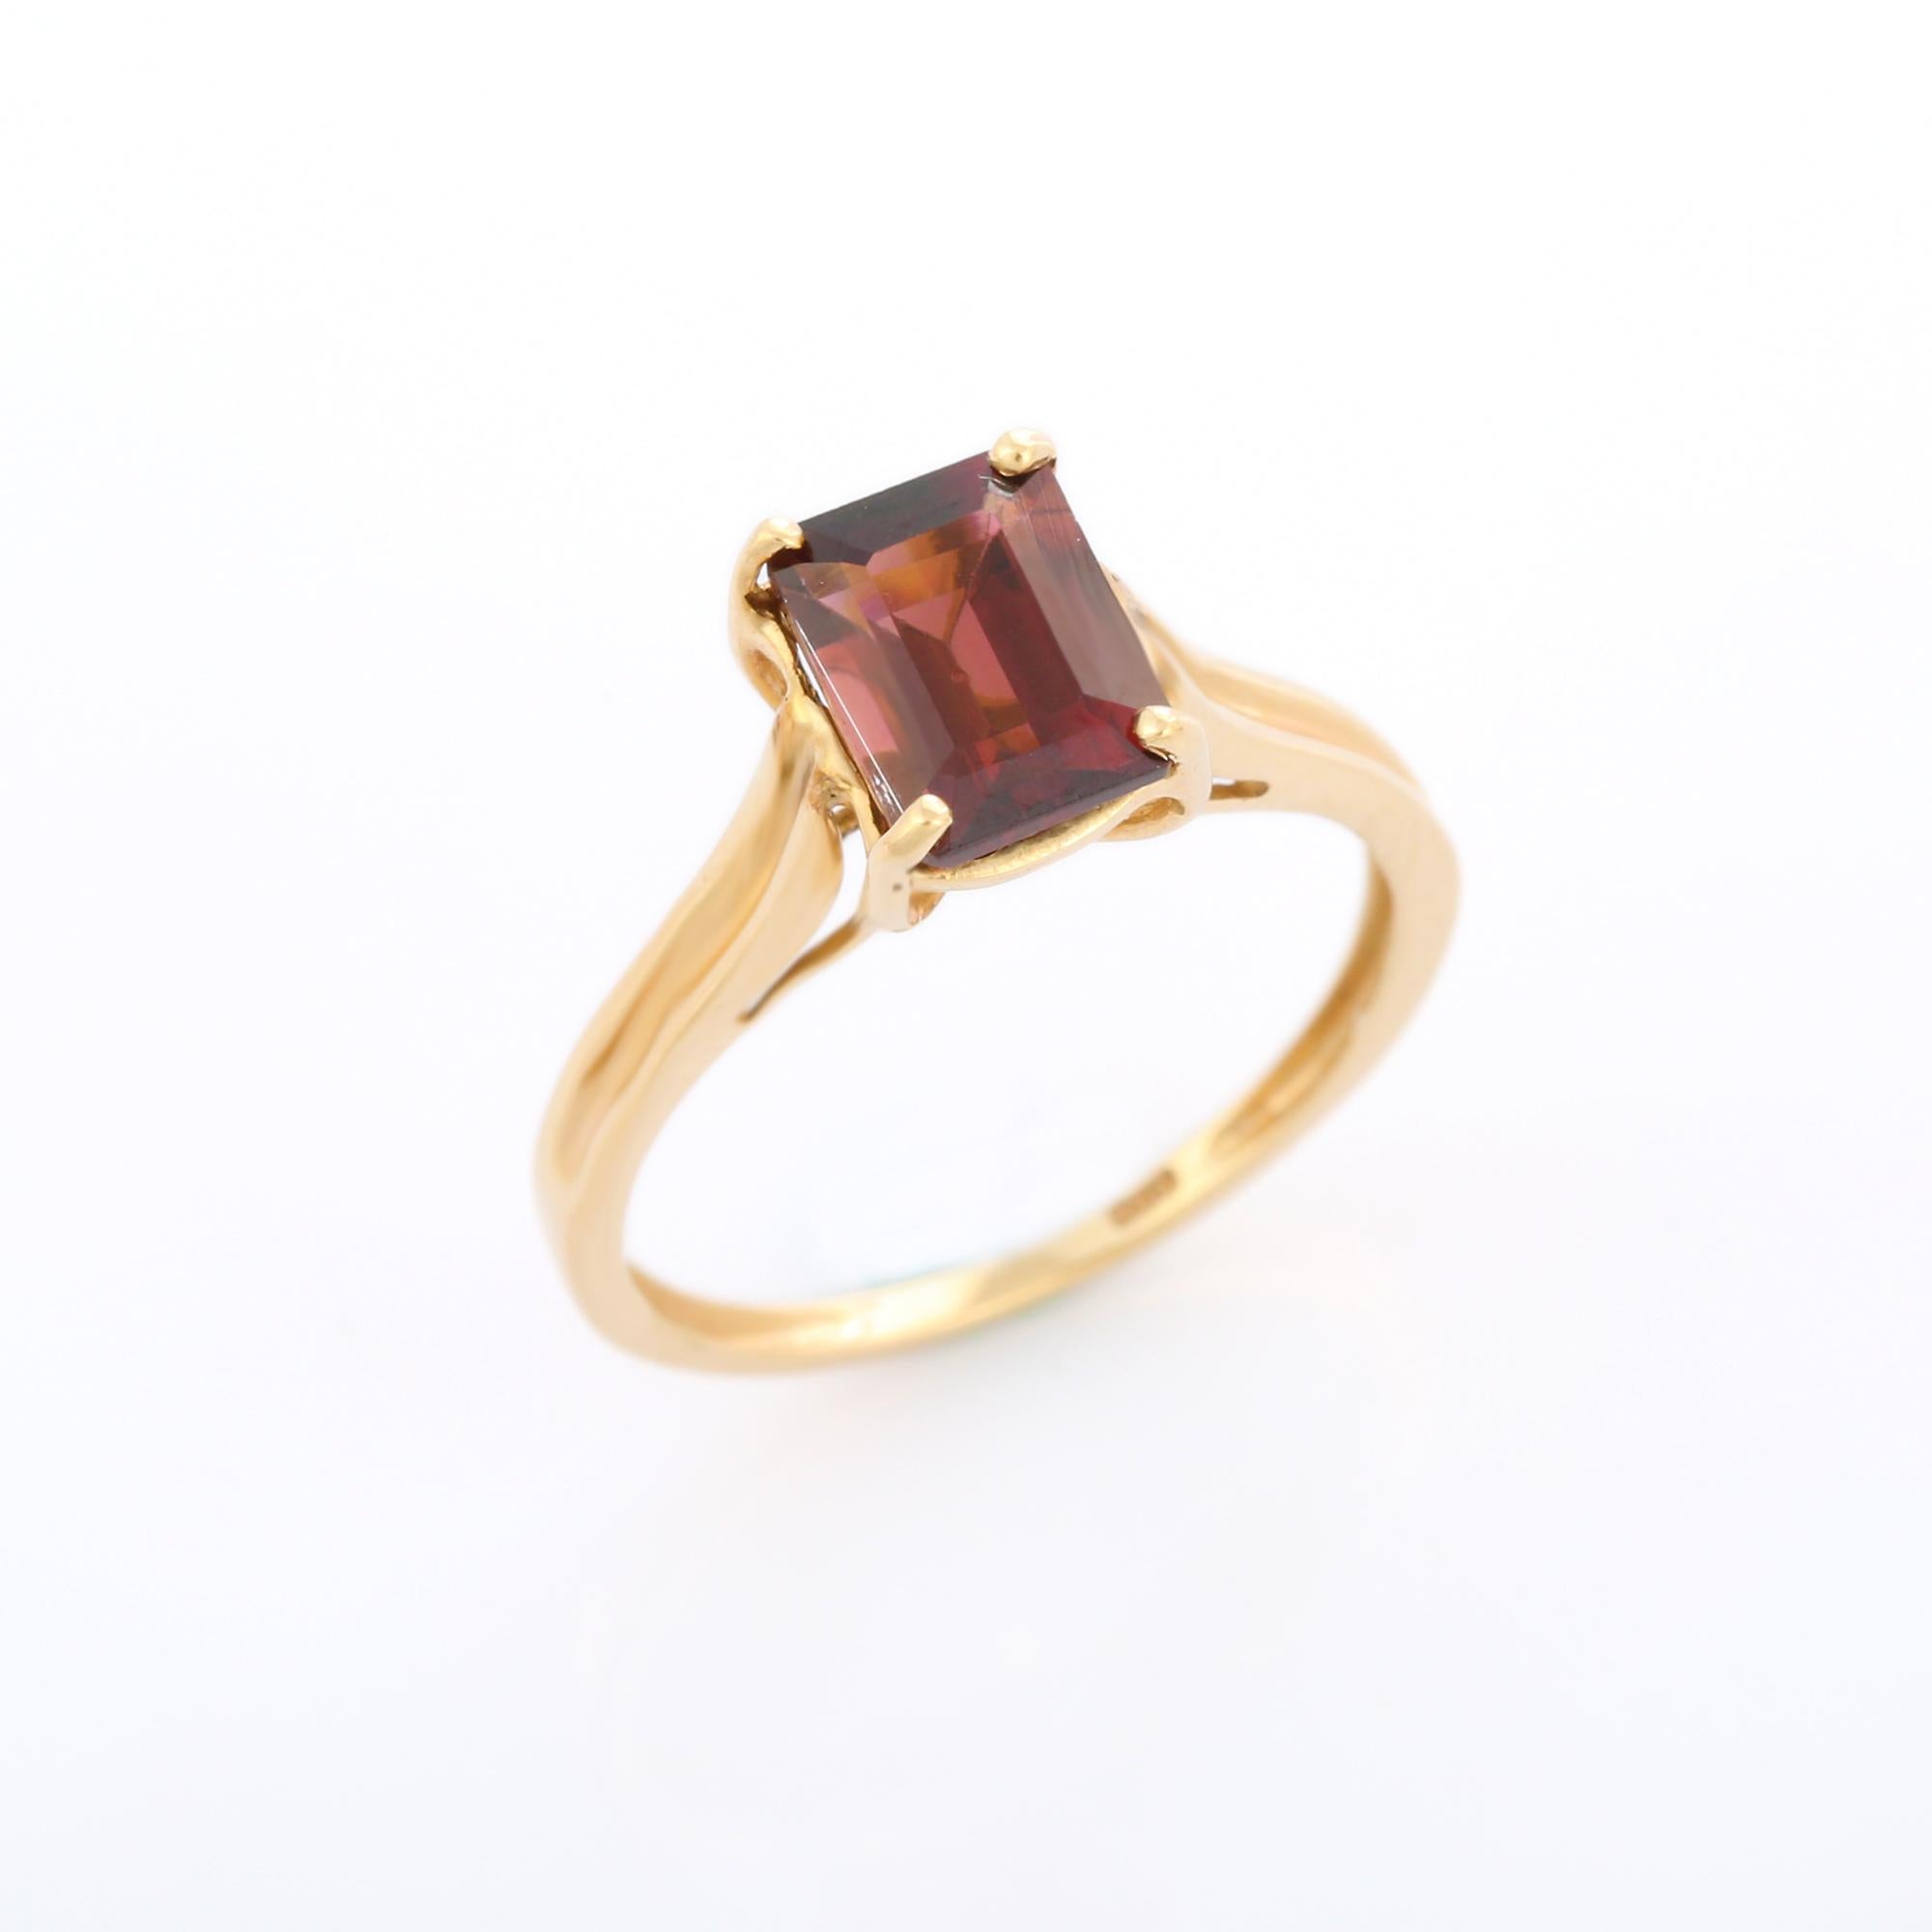 For Sale:  Octagon Cut Tourmaline Solitaire Ring in 14K Yellow Gold 7